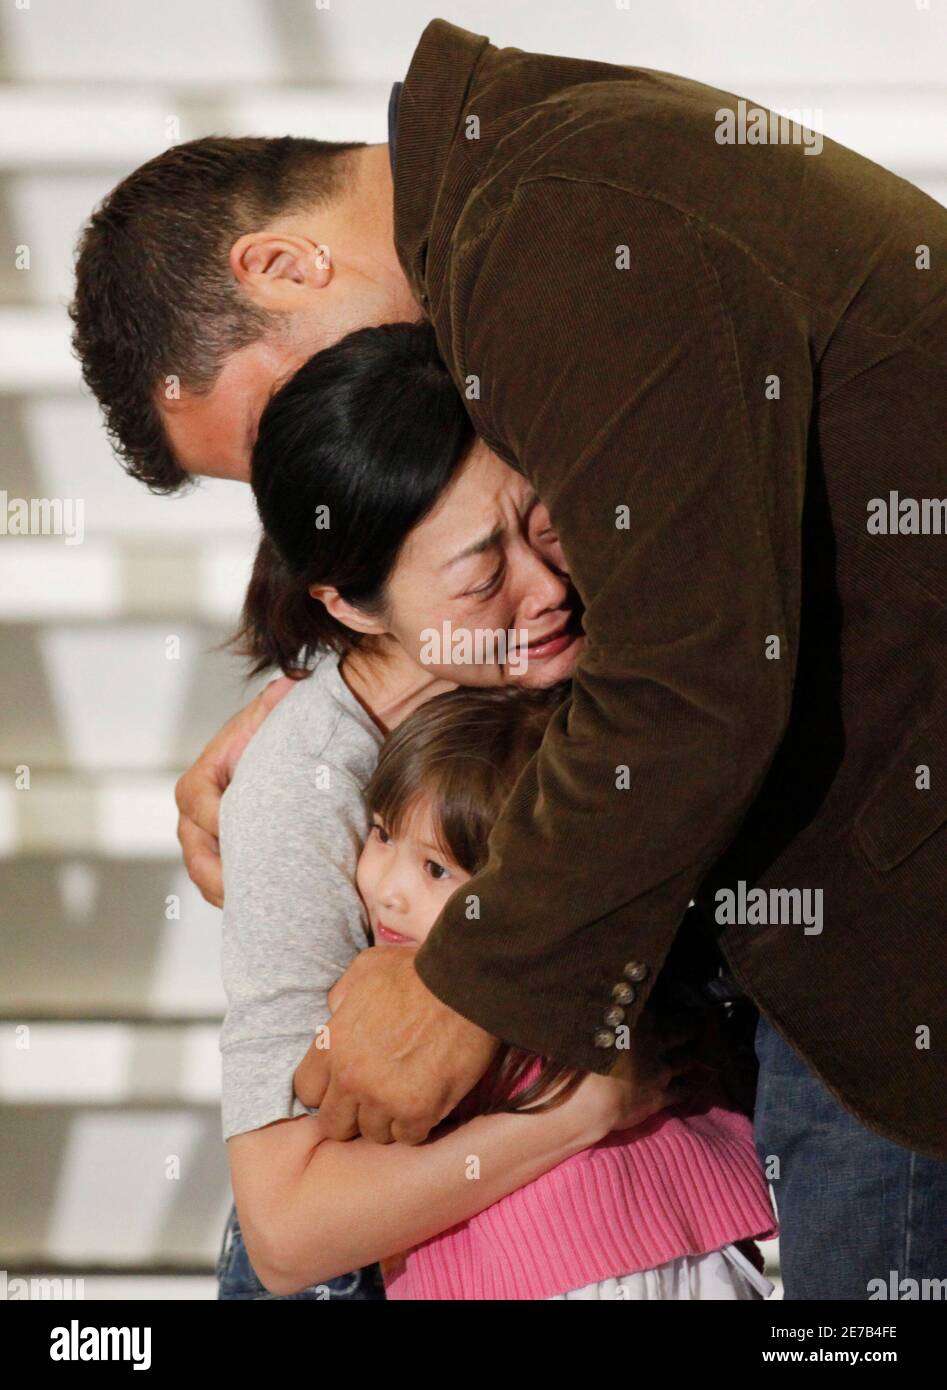 Freed . journalist Euna Lee (C) is embraced by her husband Michael  Saldate (top) and daughter Hana Saldate after arriving with Laura Ling and  former President Bill Clinton in Burbank, California August